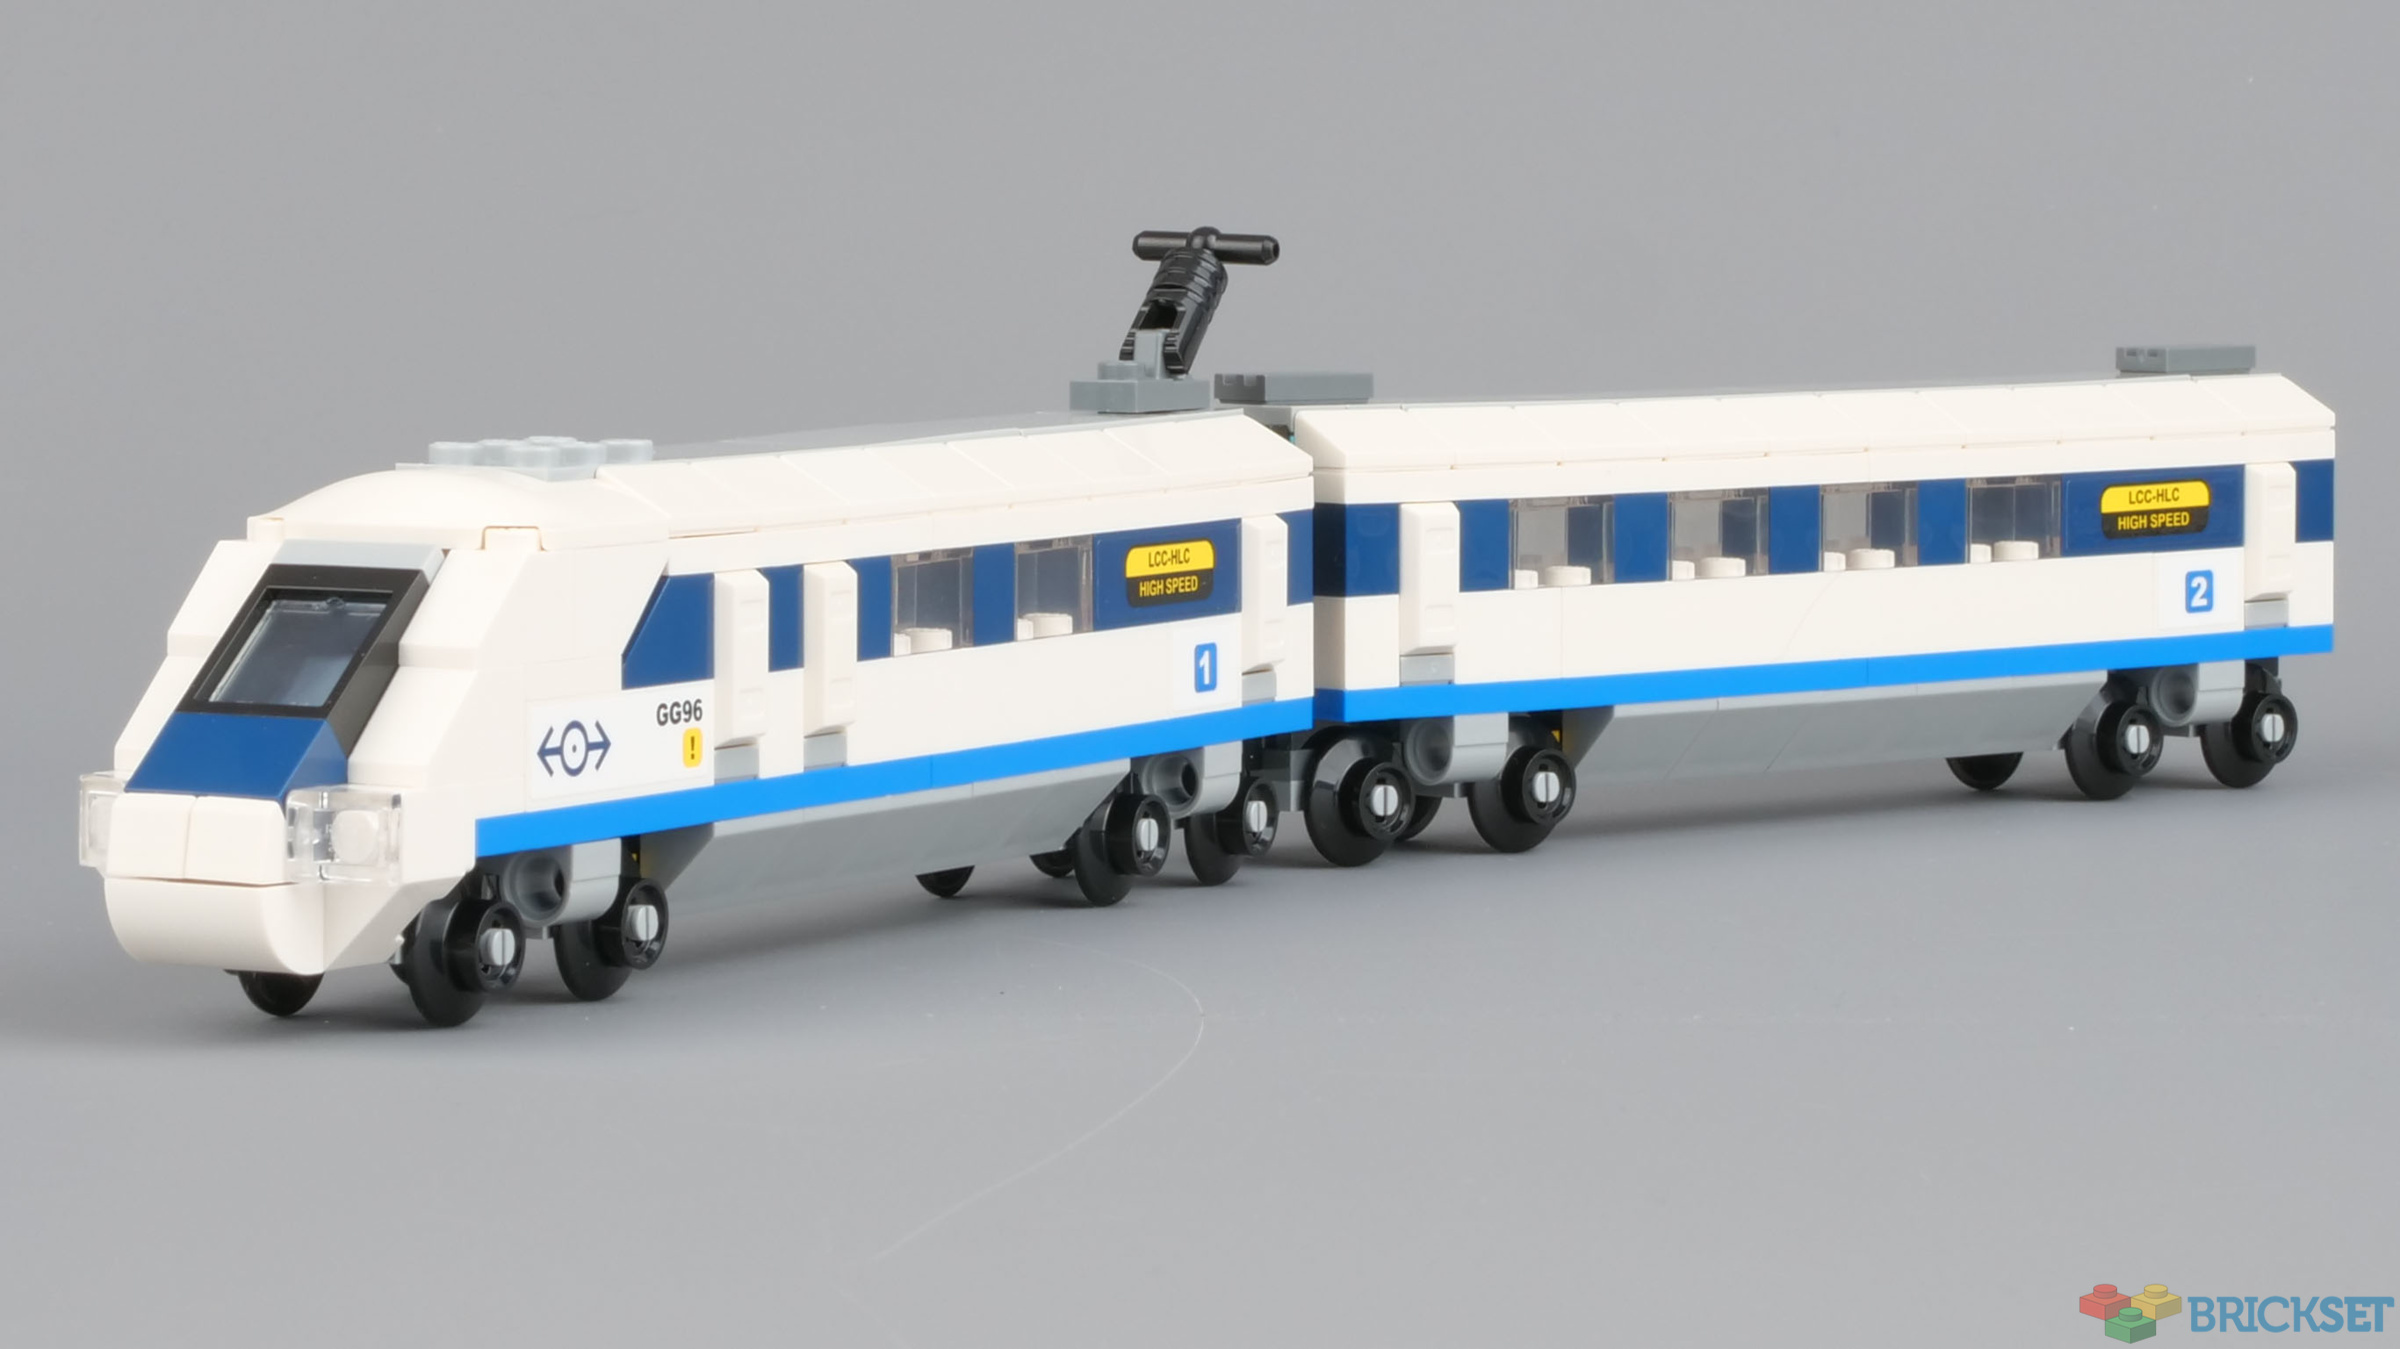 40518 High Speed Train review |